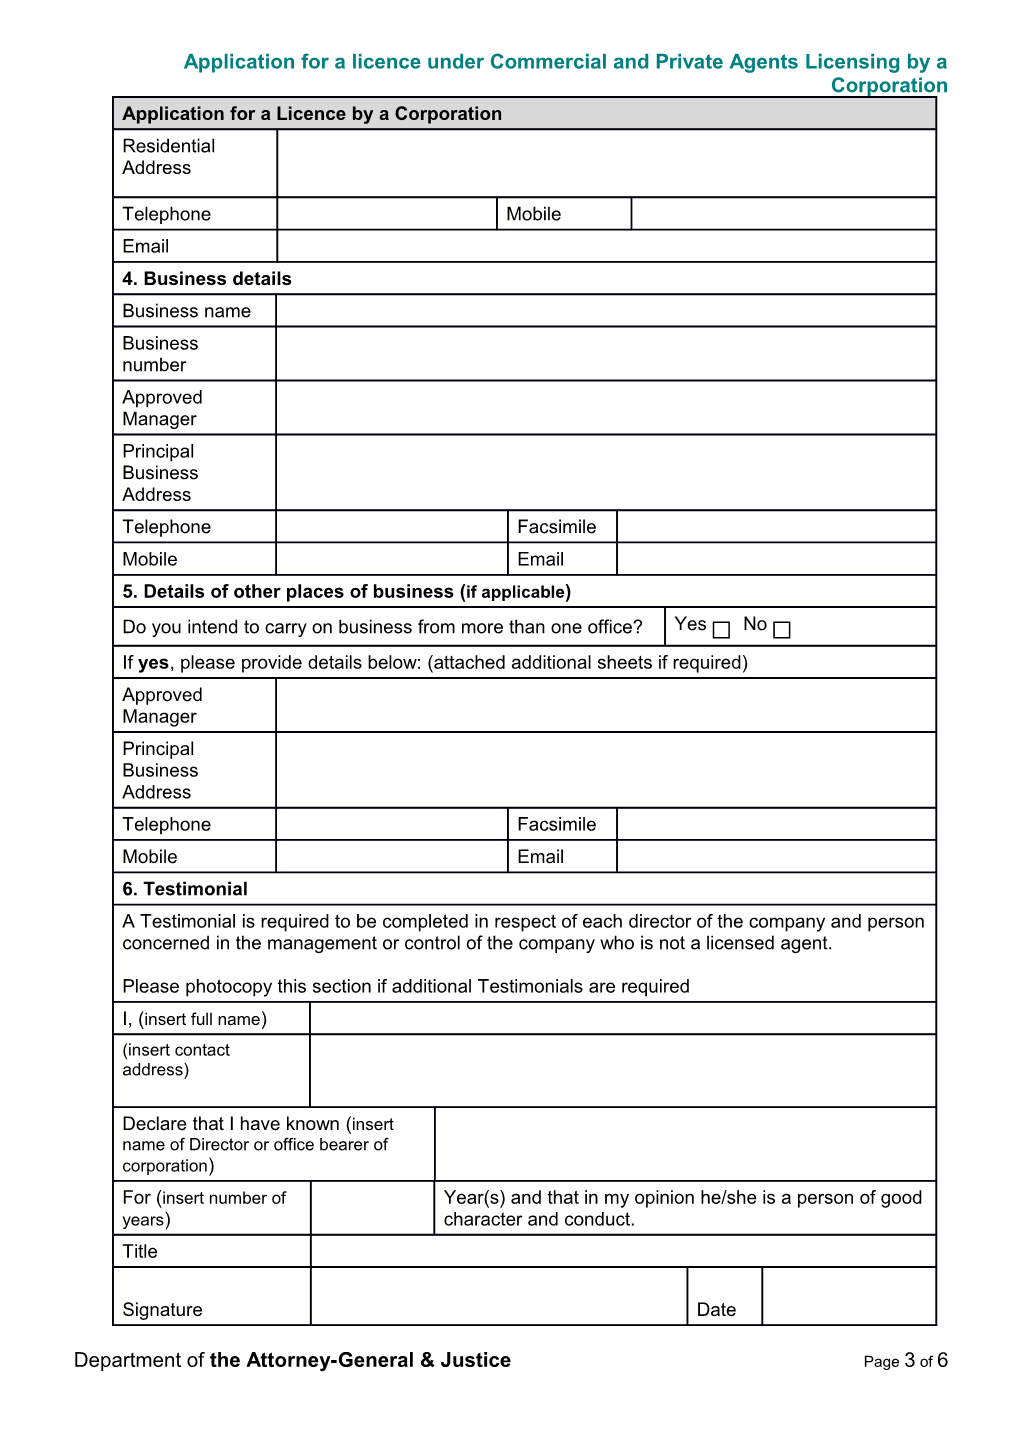 Application for a Licence by a Corporation